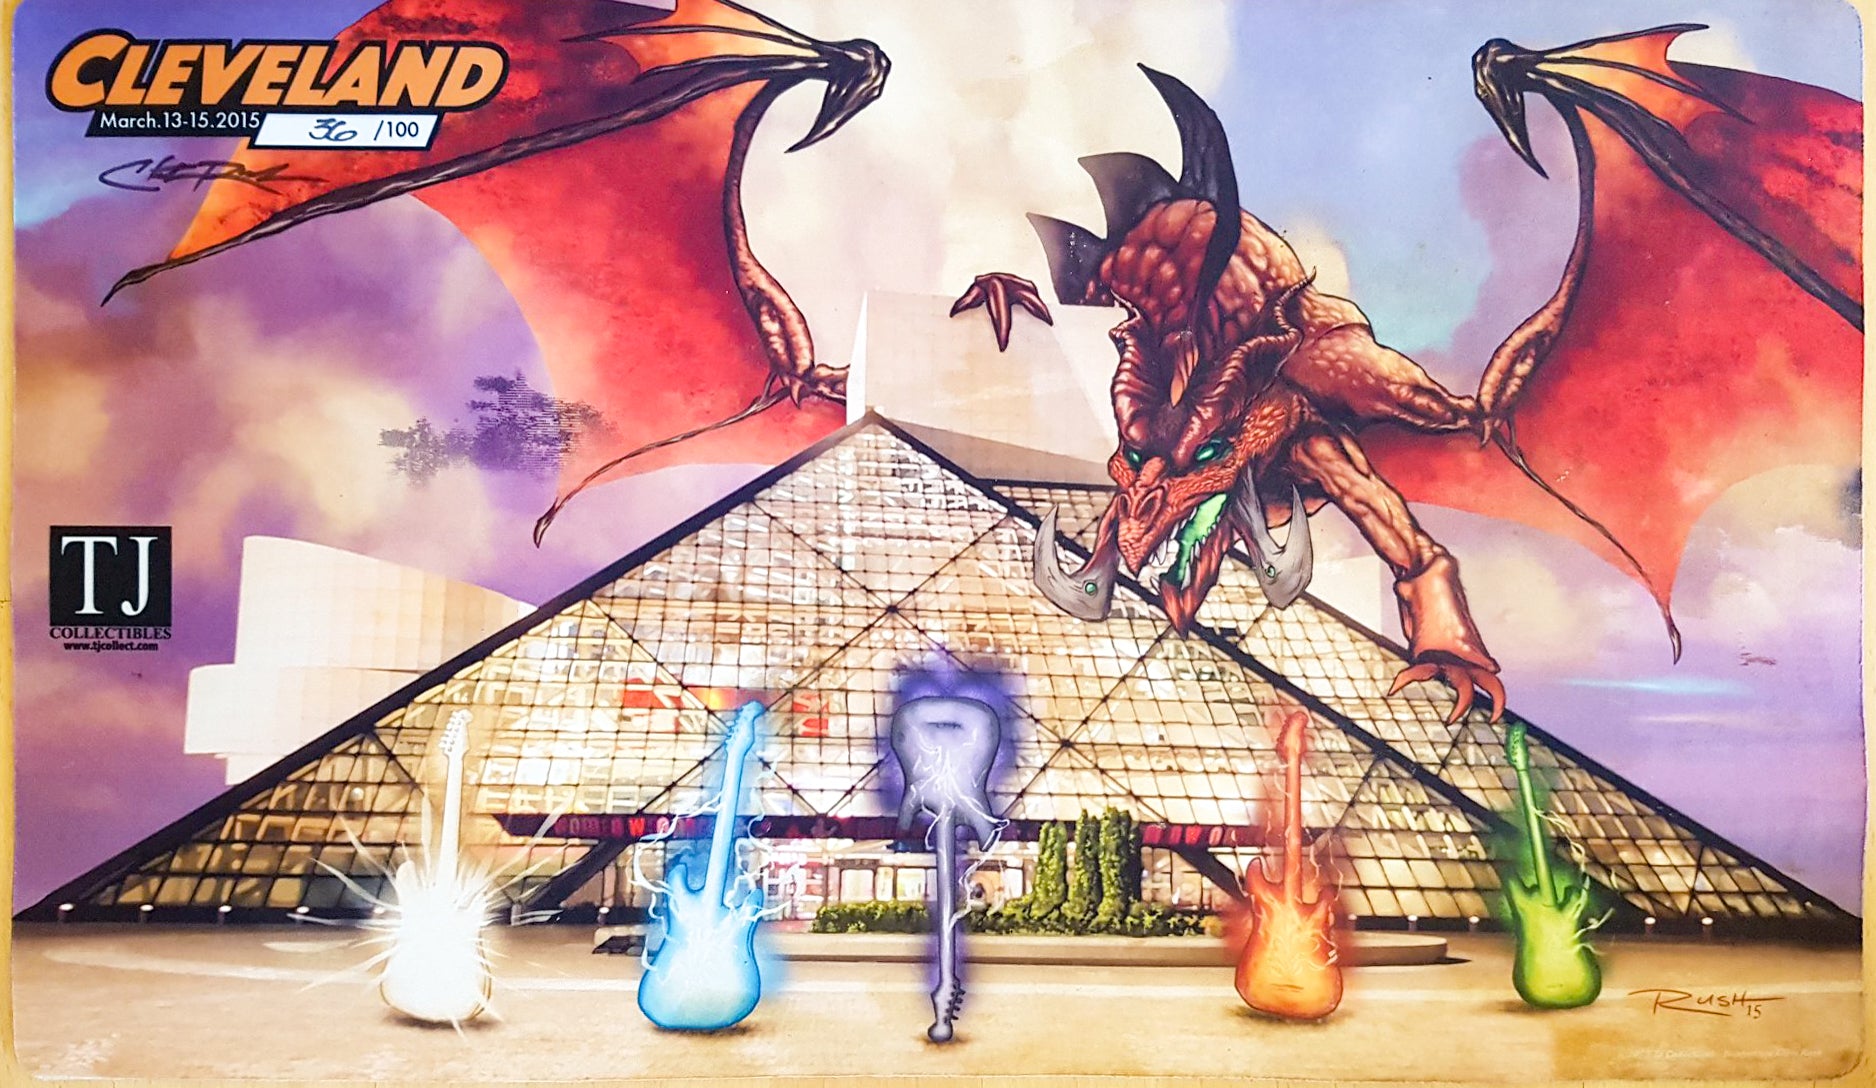 Rock & Roll Hall of Fame Dragon - Christopher Rush - Grand Prix Cleveland 2015 - Signed by the Artist - Limited Edition [36/100] - MTG Playmat